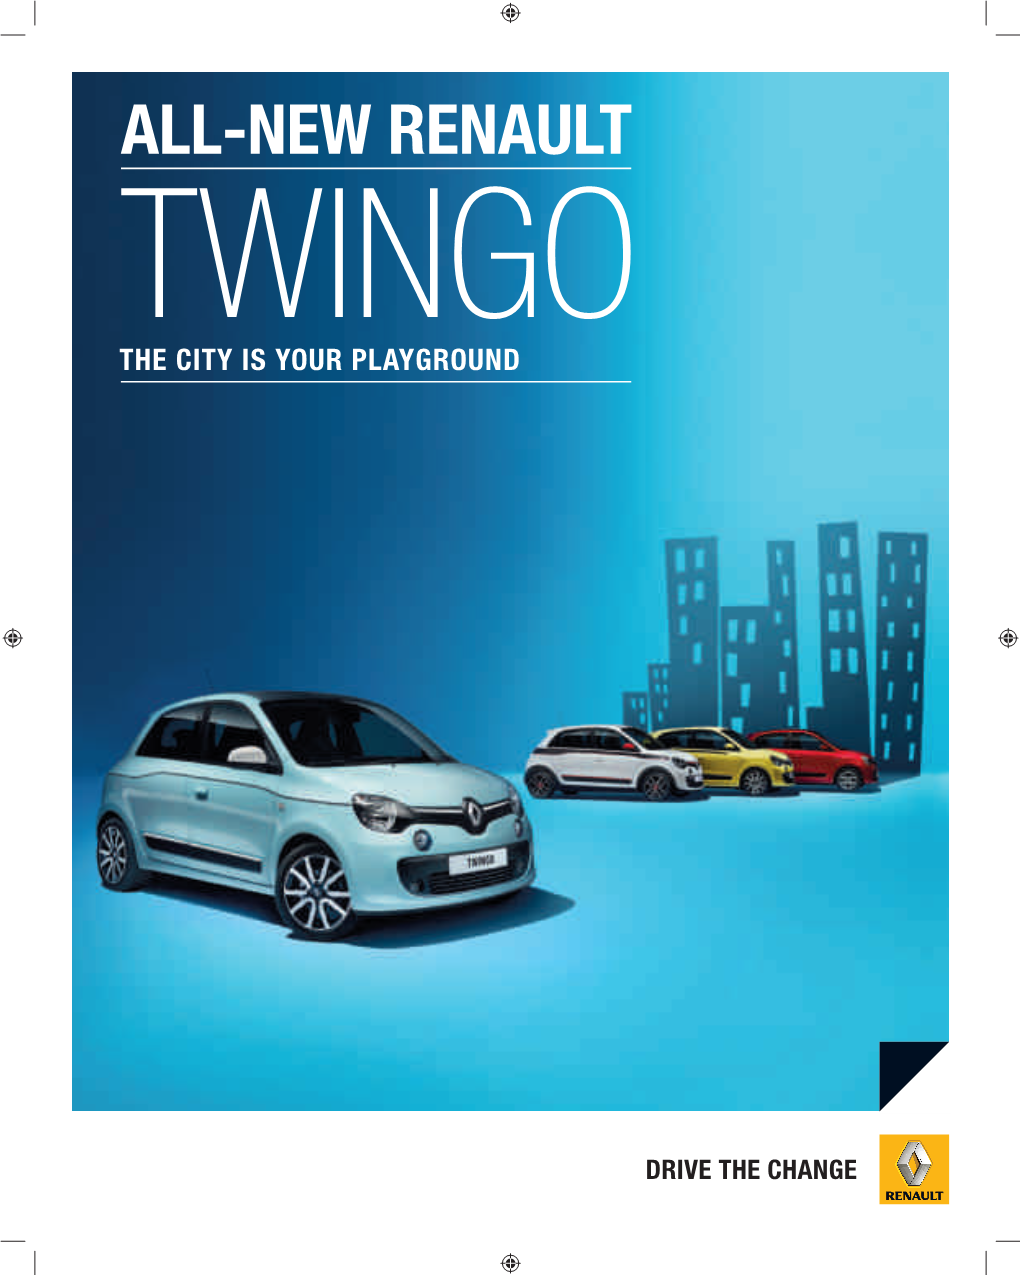 All-New Renault Twingo the City Is Your Playground